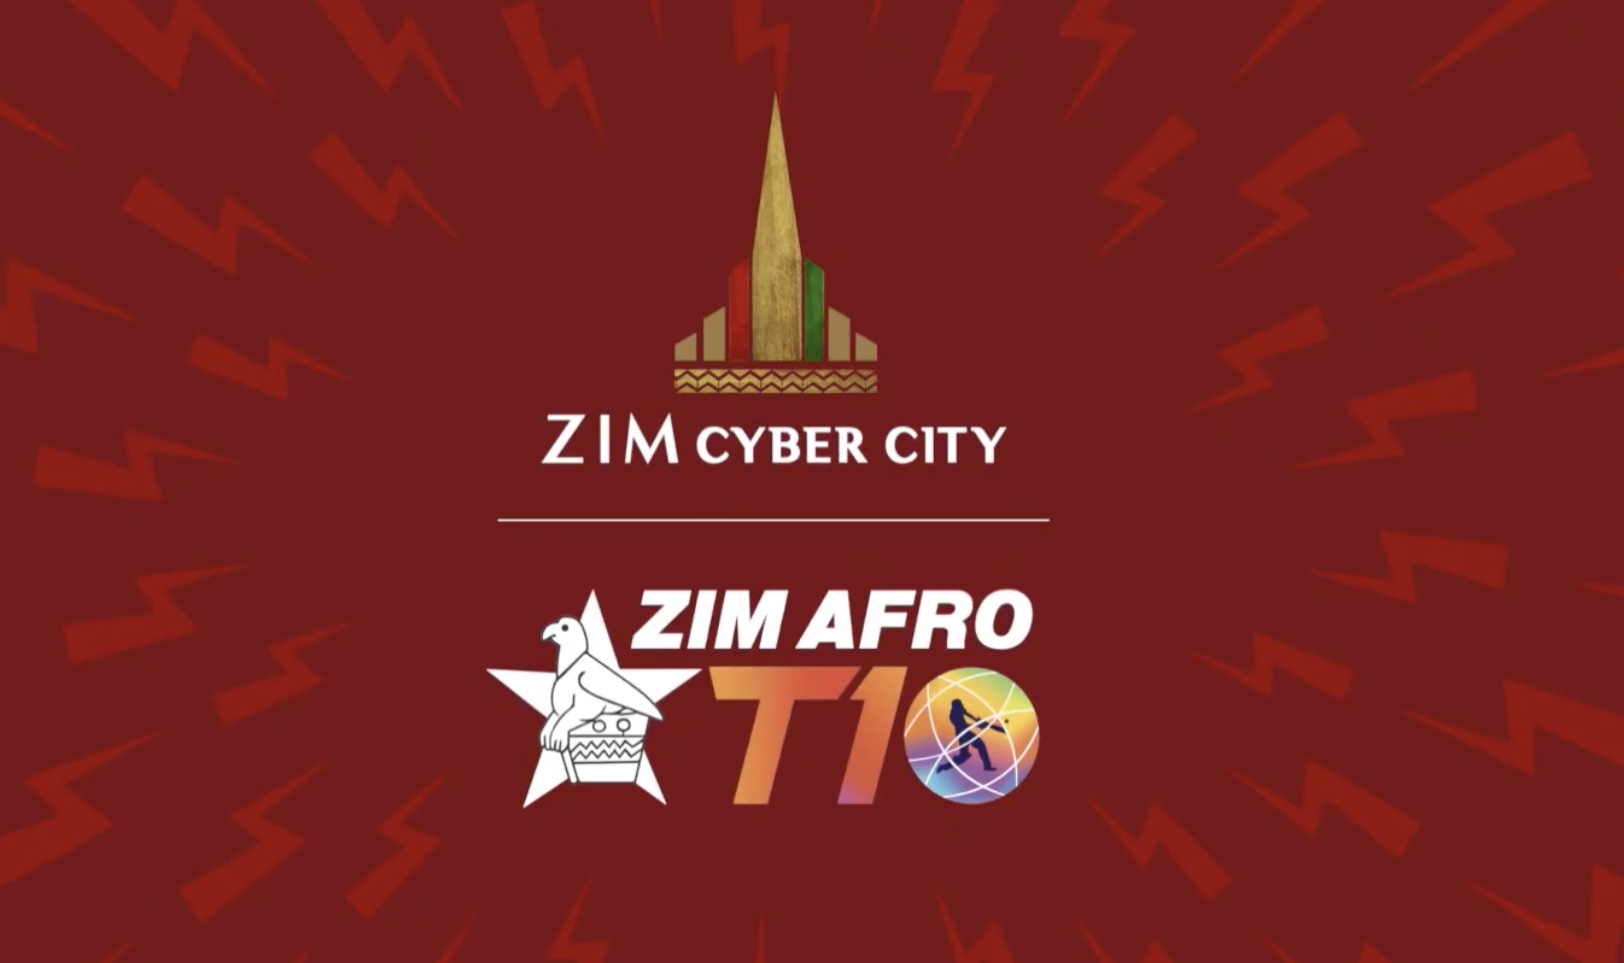 80 players drafted: 1st edition Cyber City Zim-Afro T10